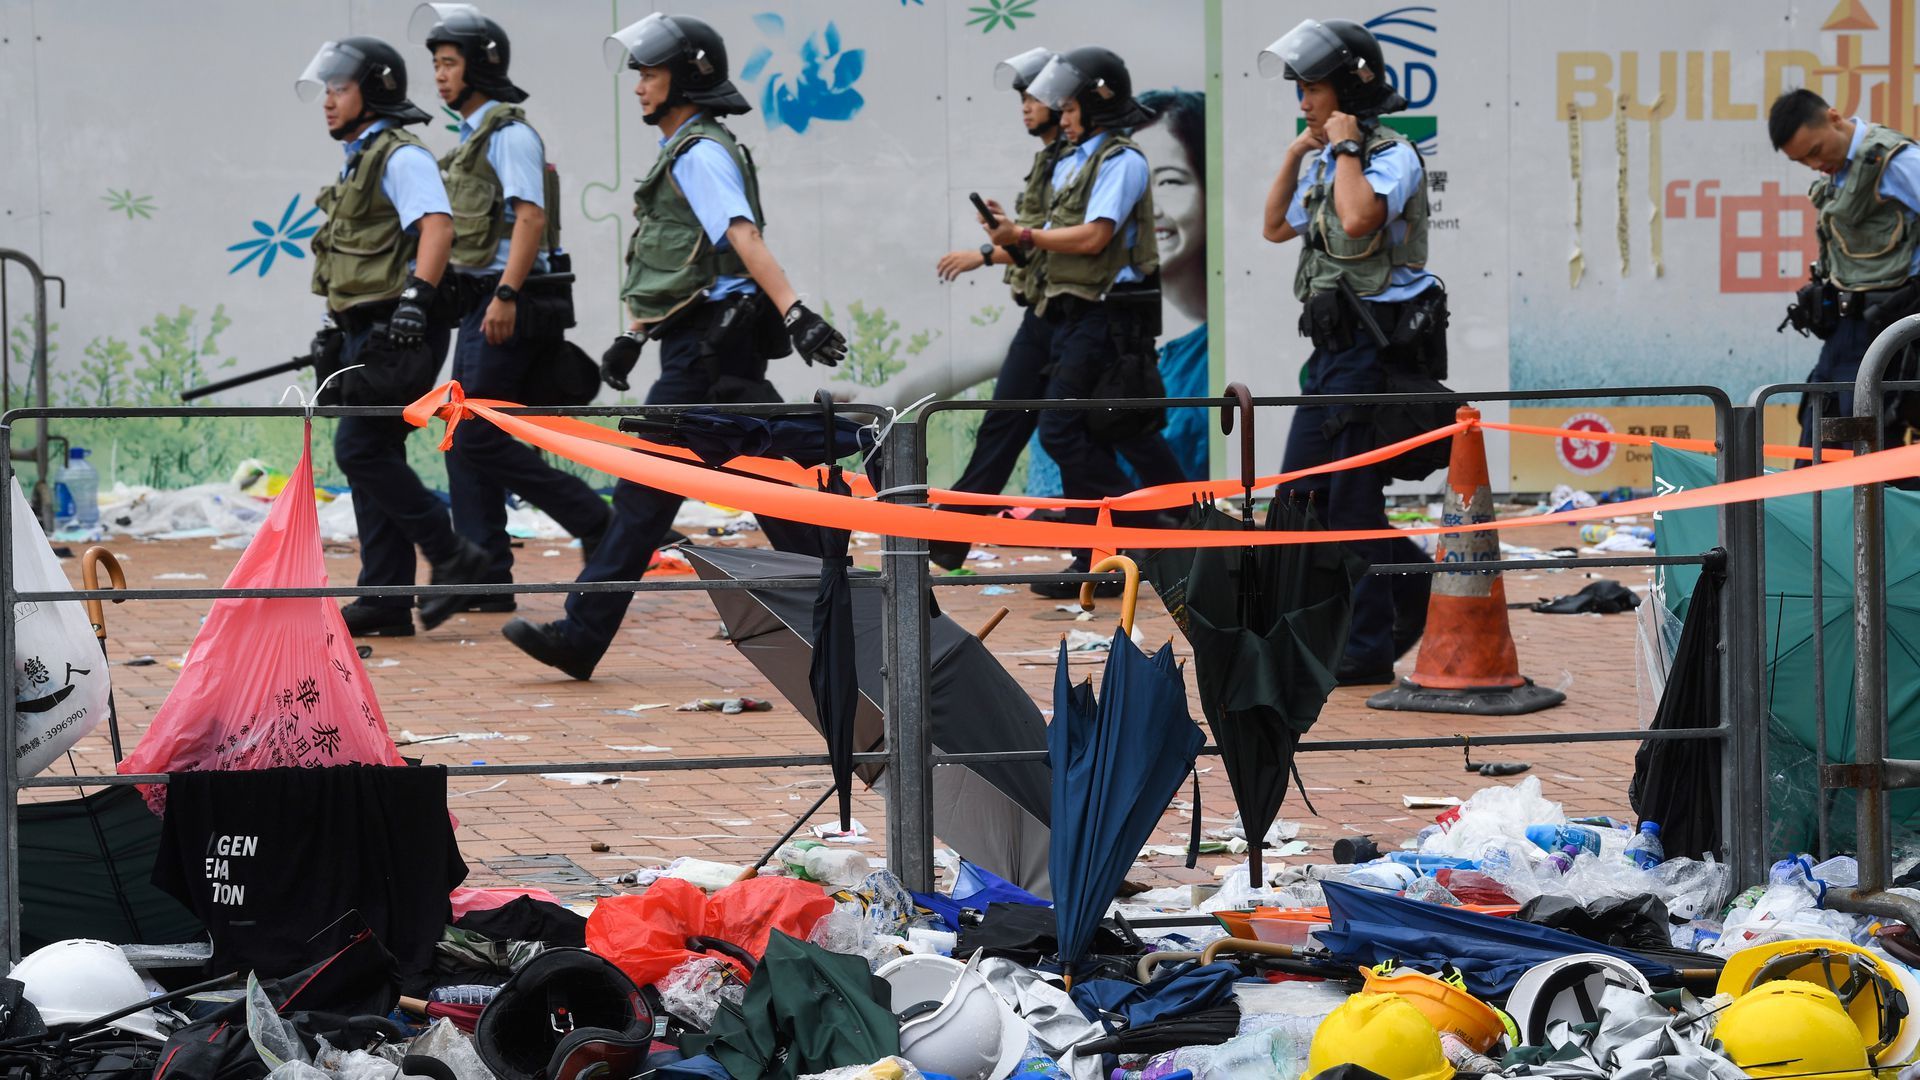 Police walk past debris on a street a day after a mass protest. Photo: Anthony Wallace/AFP/Getty Images